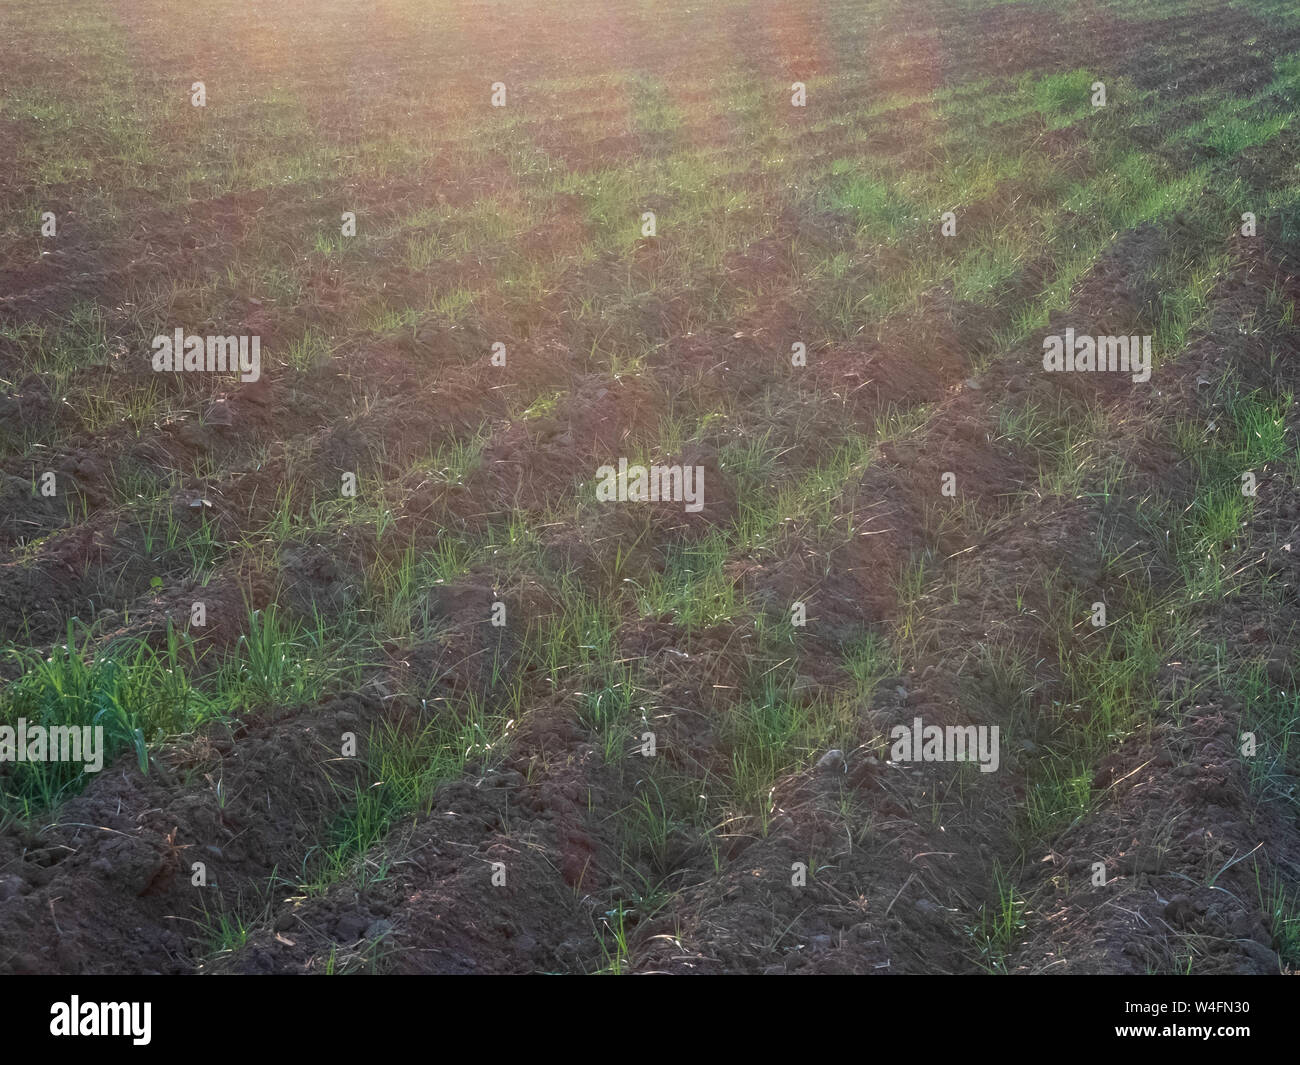 Furrows and young sprouts of wheat in the agricultural field. Stock Photo